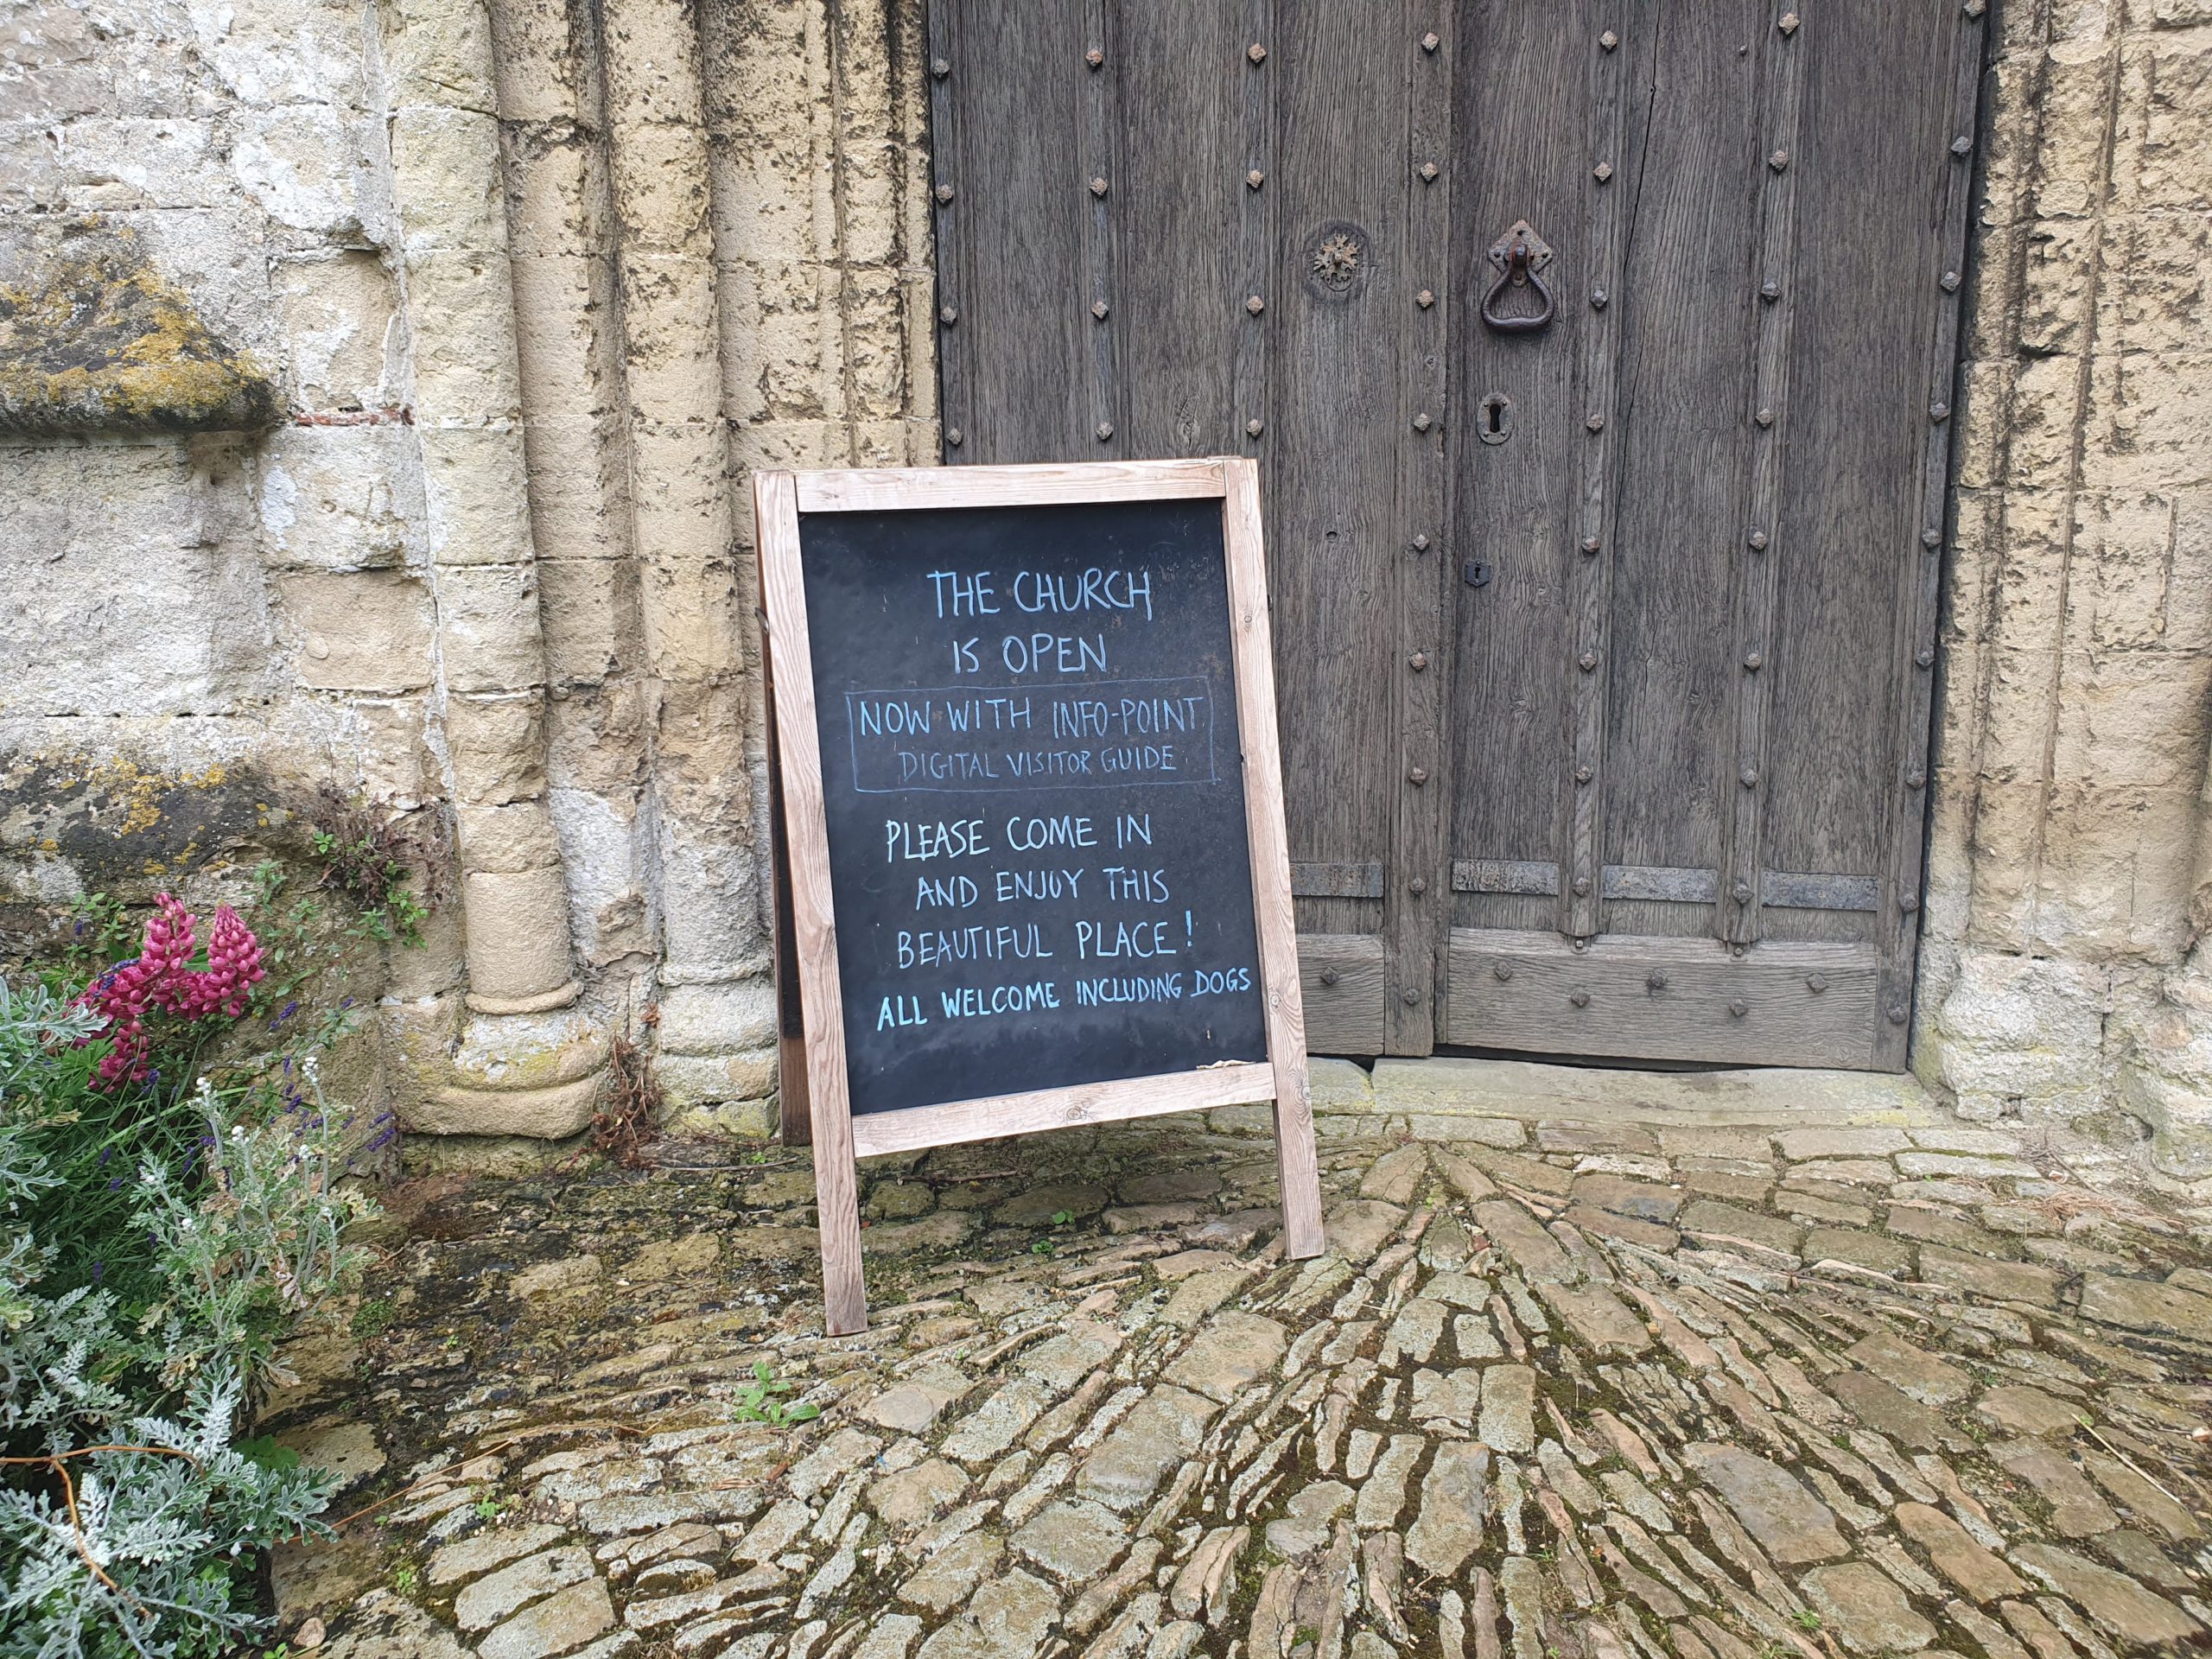 A chalk board with the words, "The church is open. Now with Info-Point digital visitor guide" stands on the cobbled pathway outside the closed wooden doorway of the church.